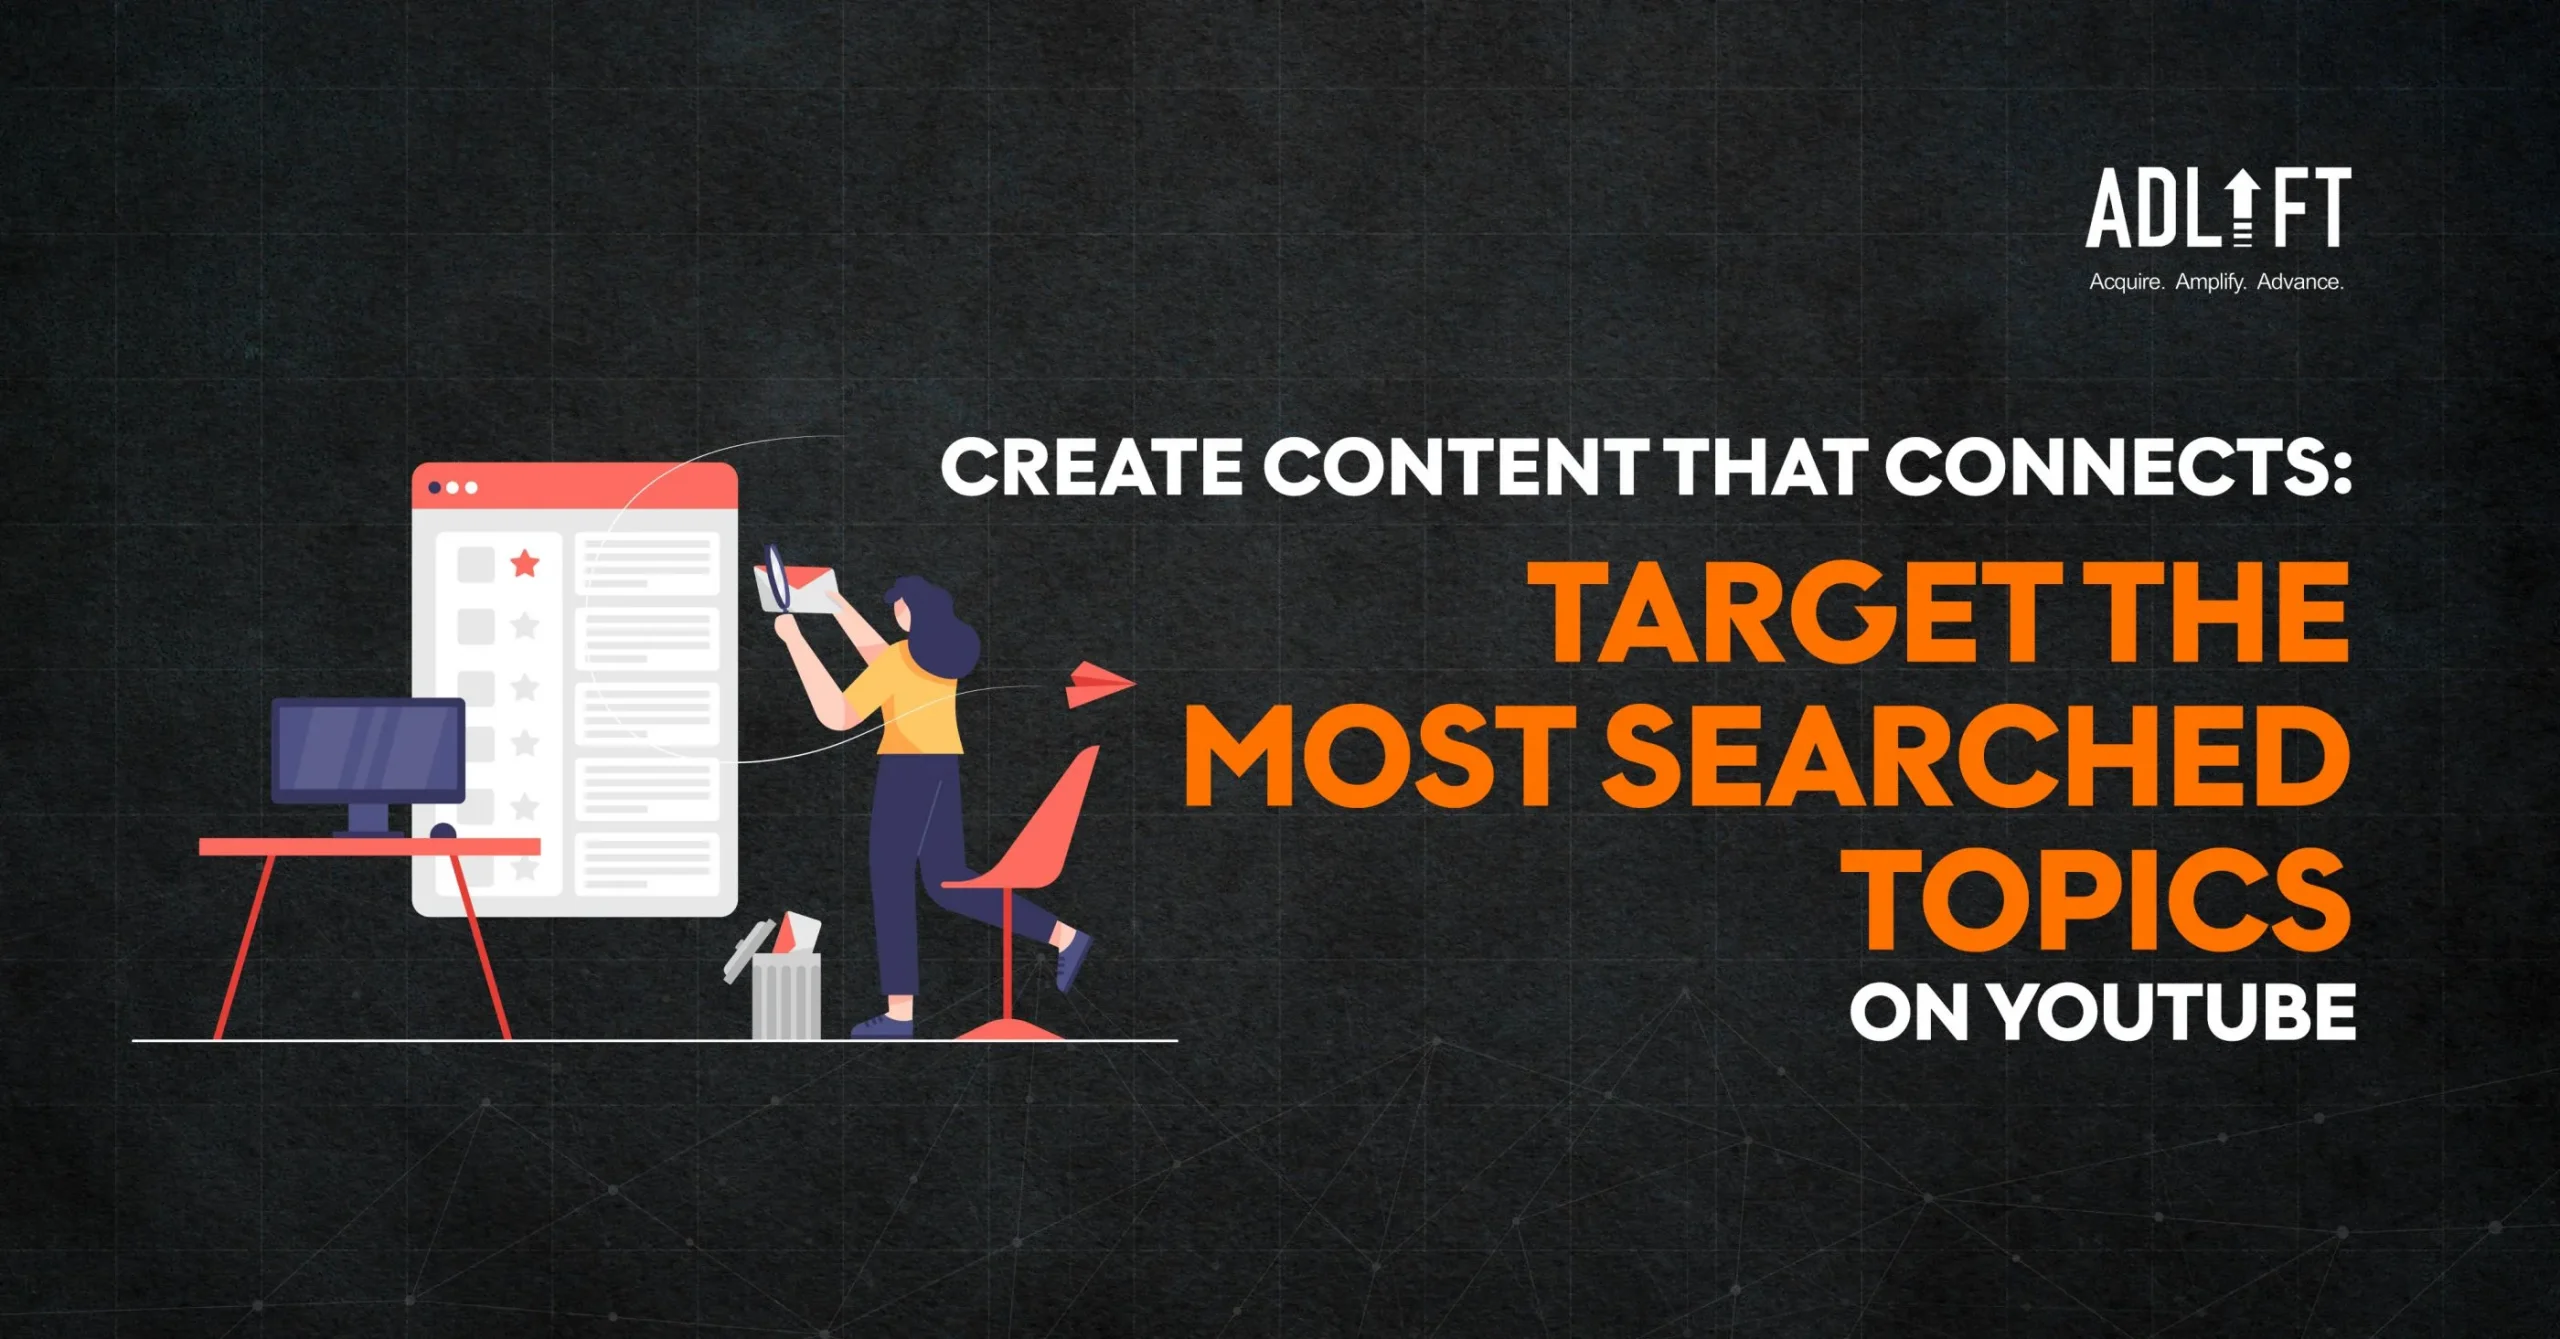 Create Content that Connects: Target the Most Searched Topics on YouTube